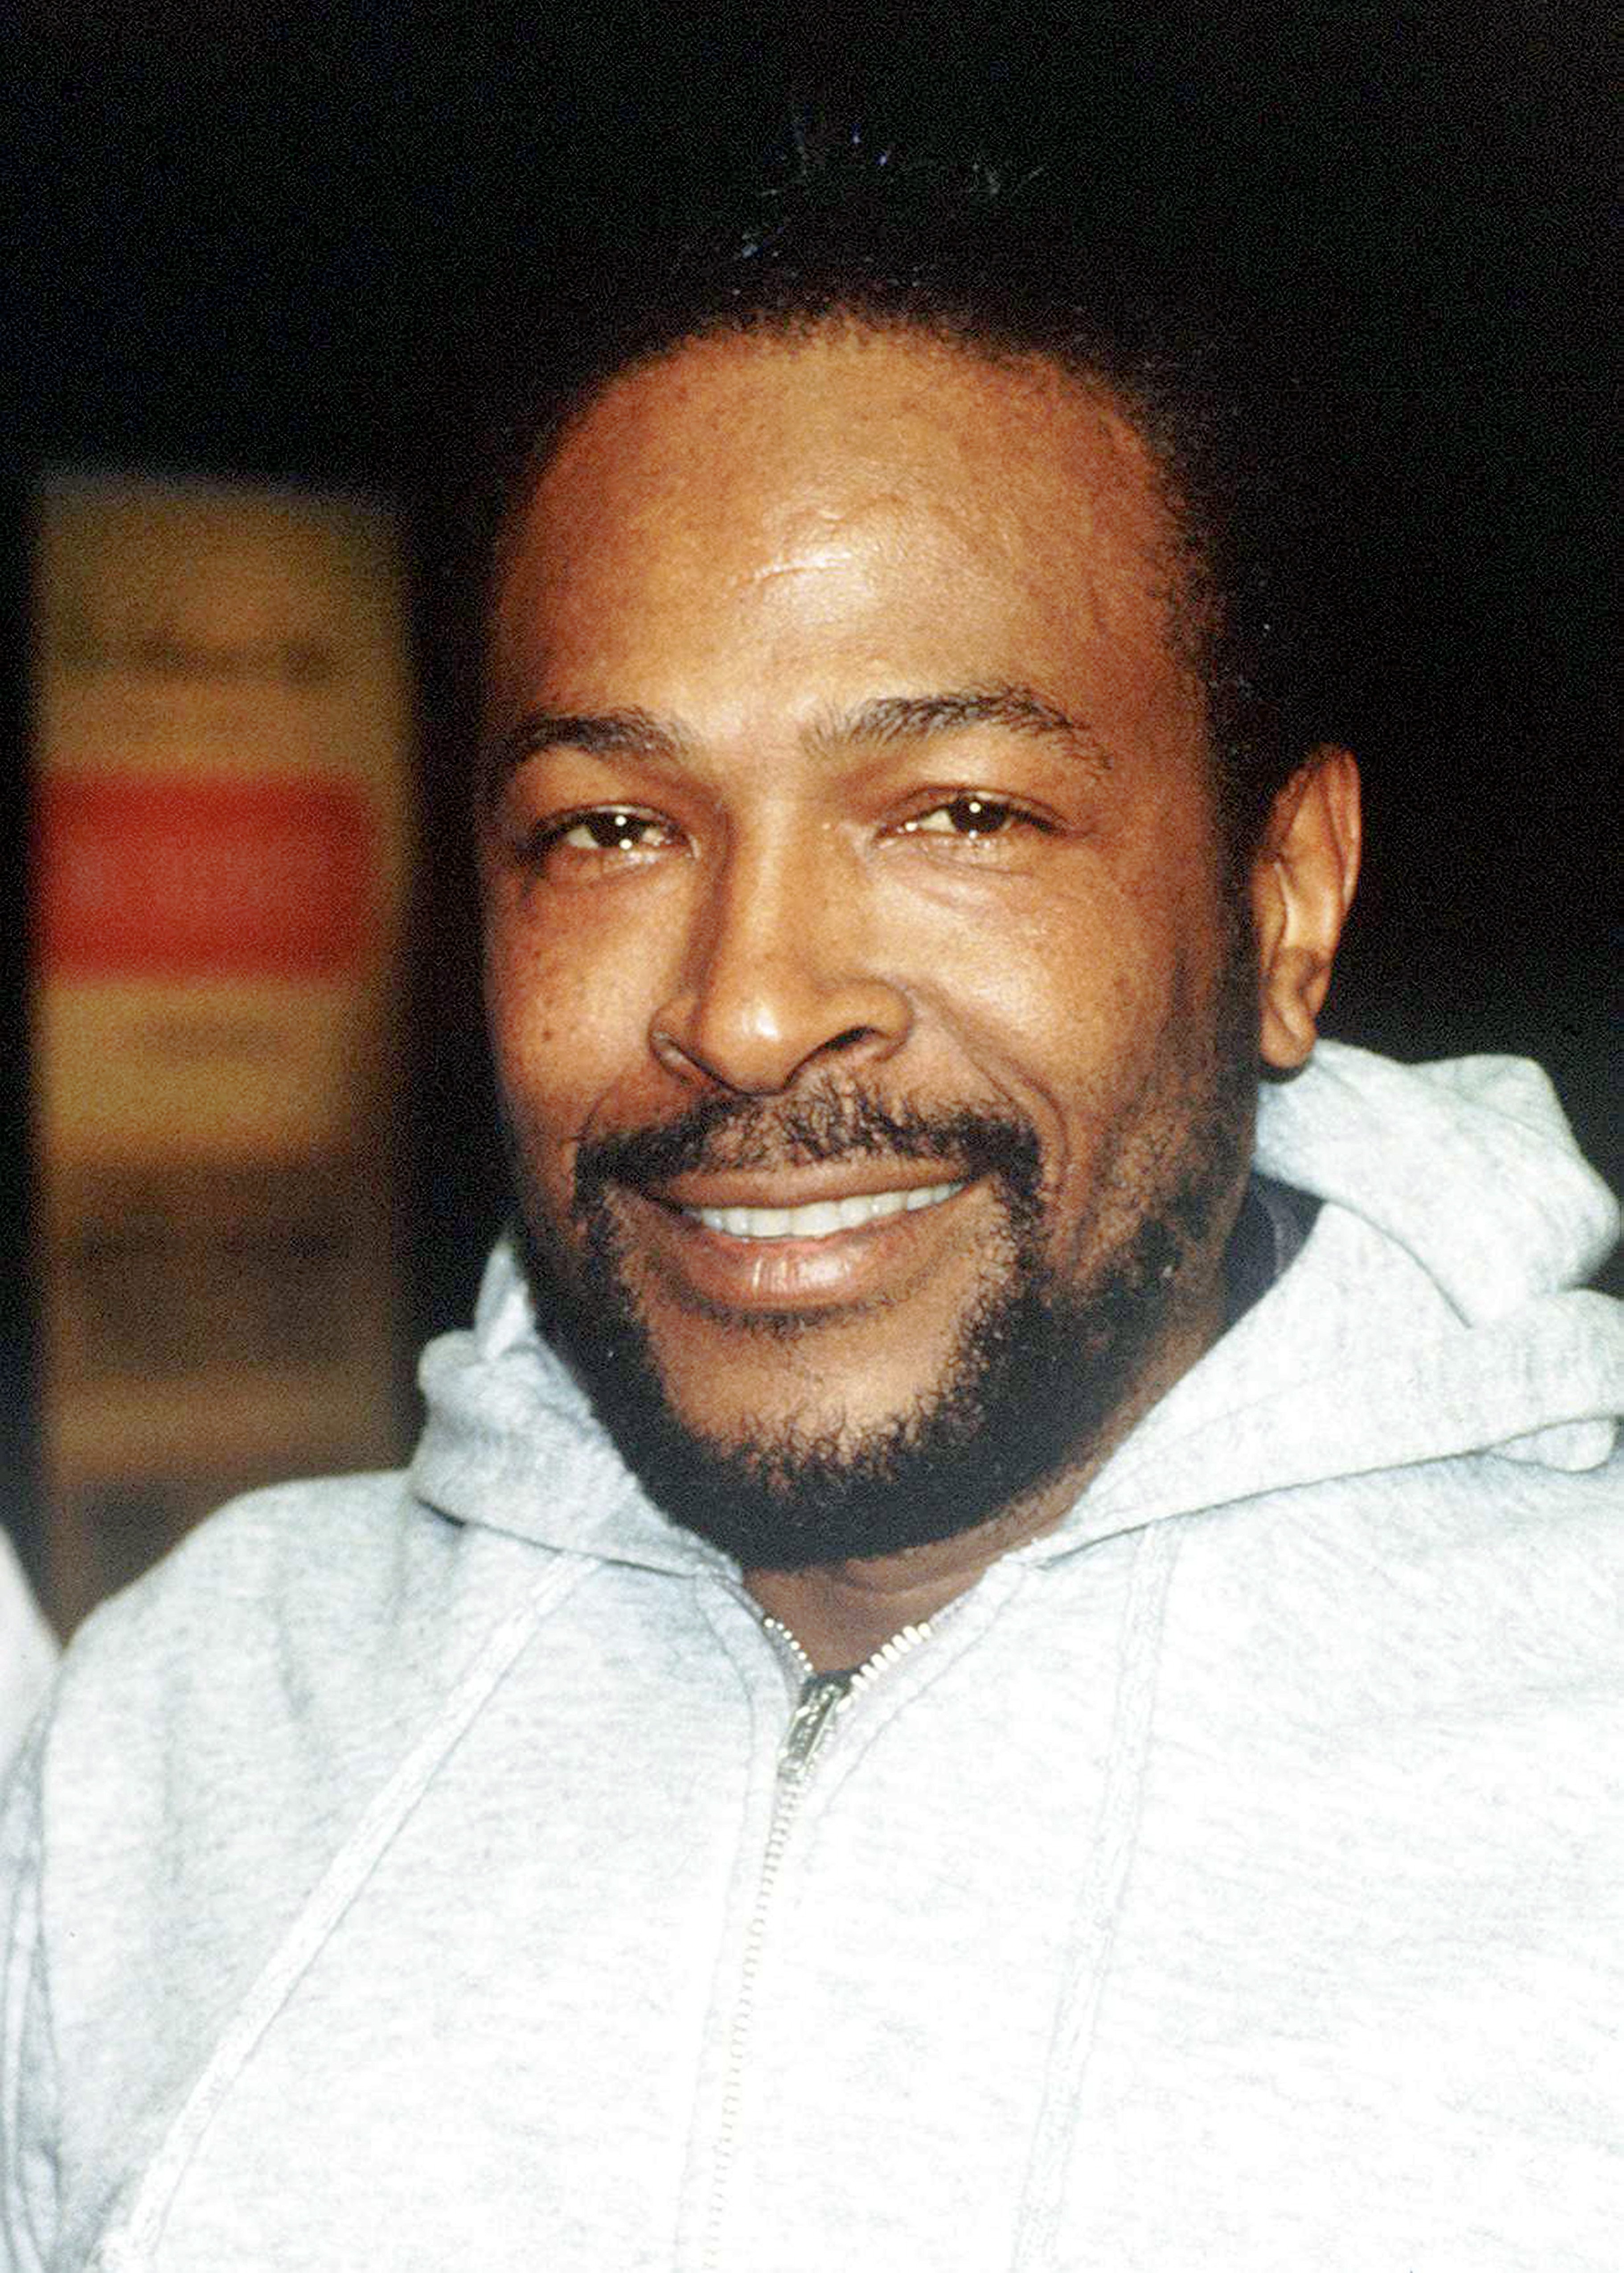 Singer Marvin Gaye (1939 - 1984), circa 1980. | Source: Getty Images